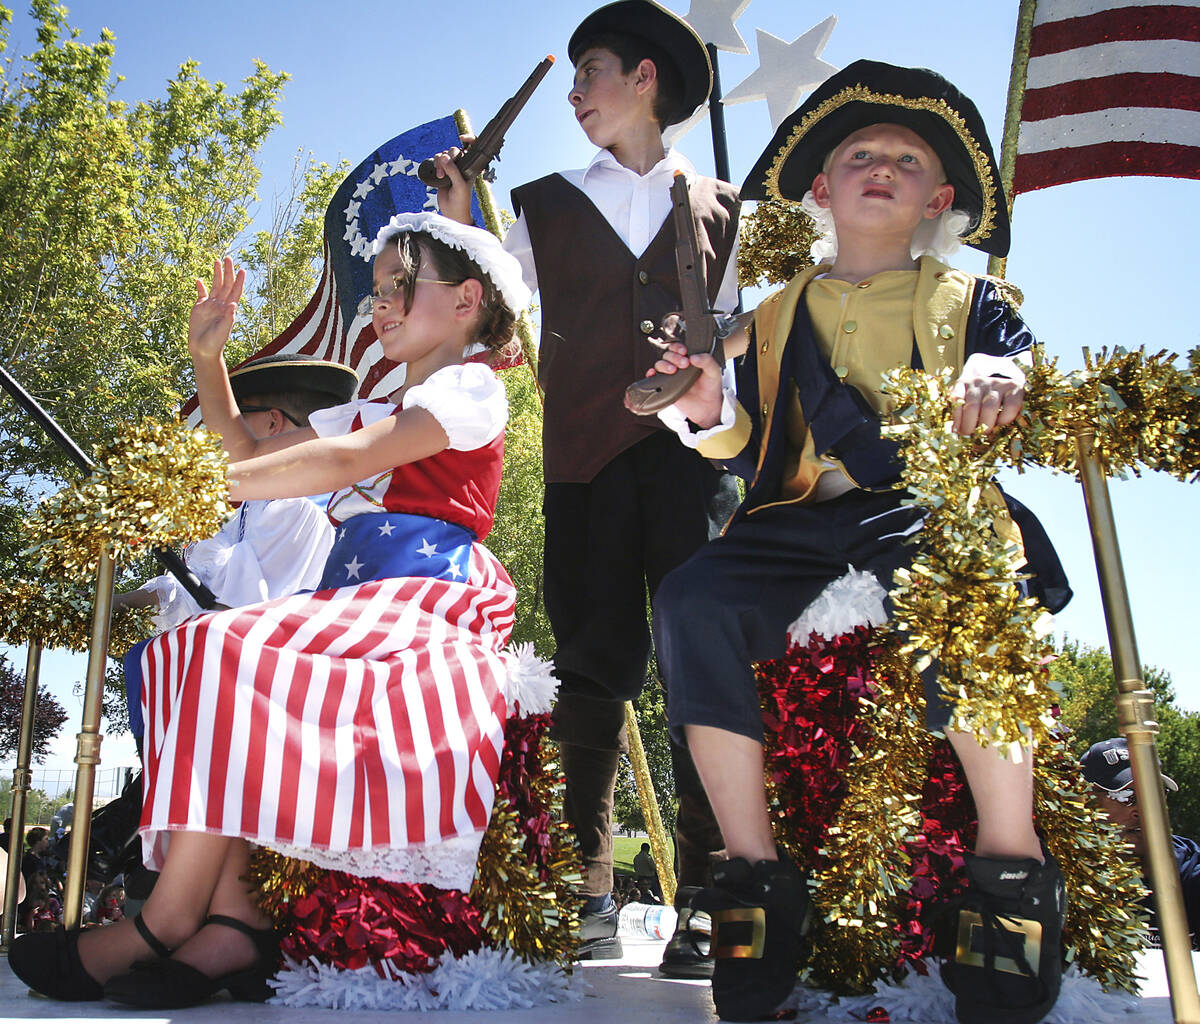 The founding fathers and mother enjoy their ride on a patriotic float during the 2009 Summerlin ...